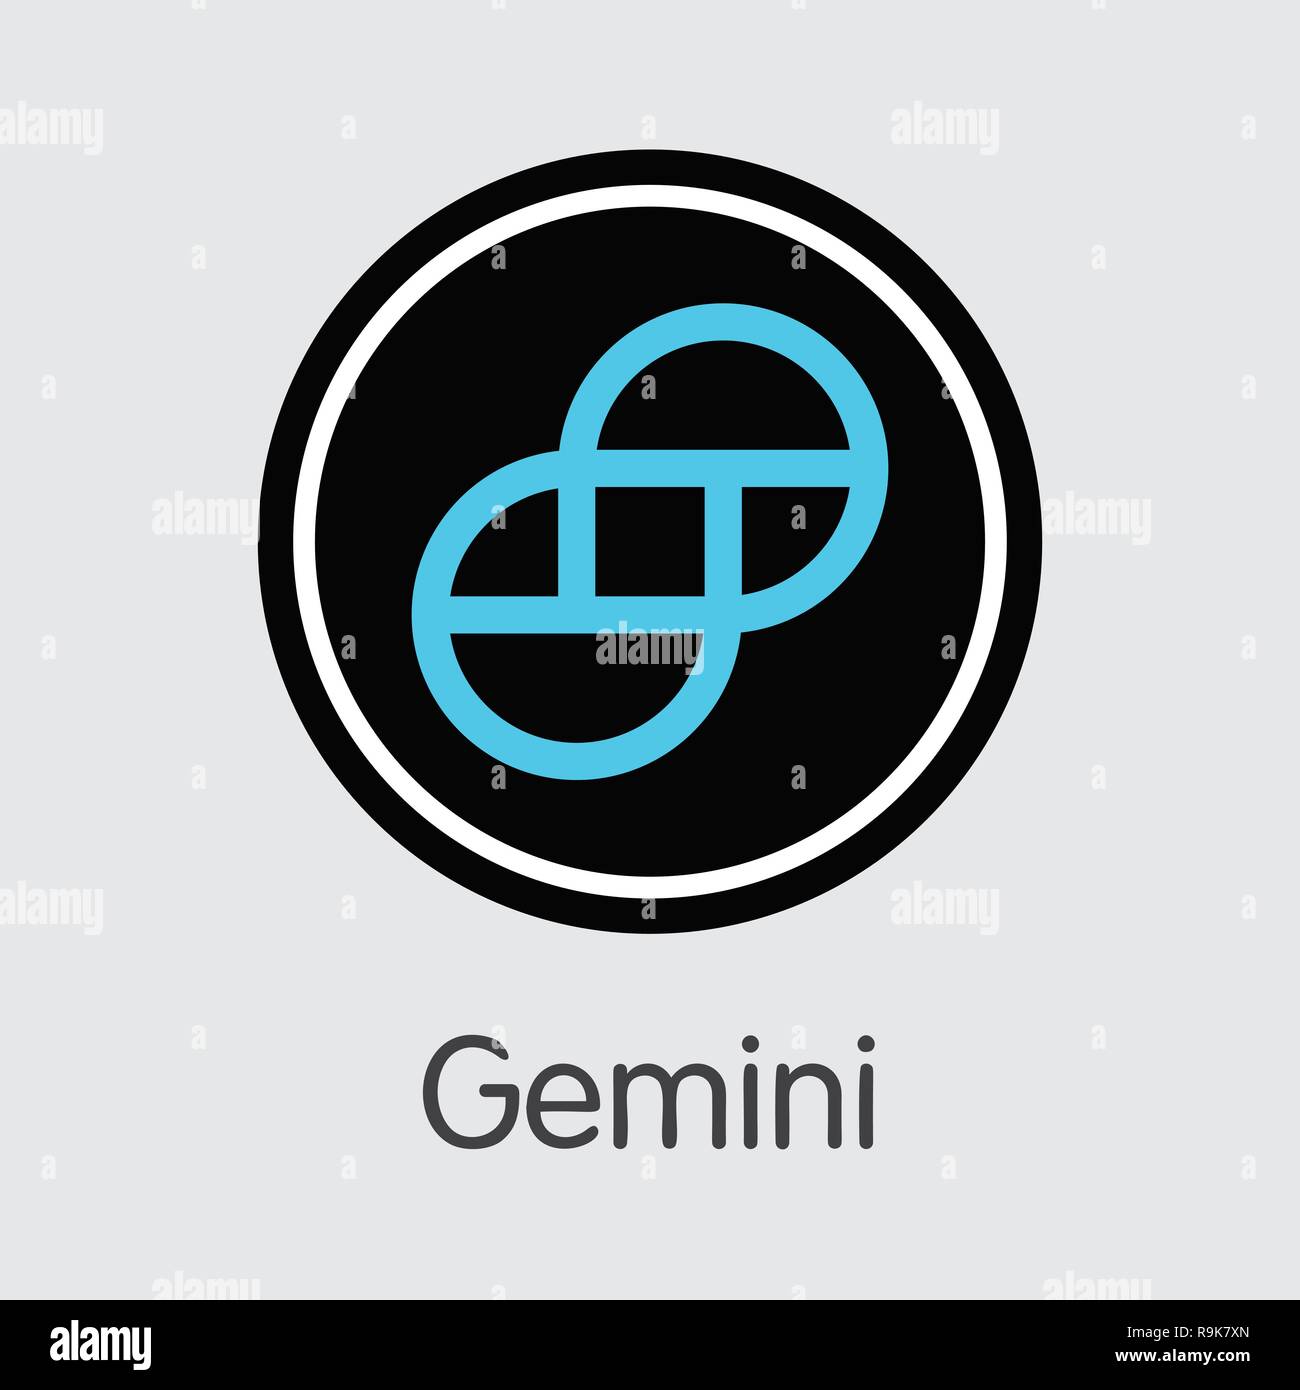 Crypto Exchange Gemini: Backing GUSD Stablecoin's DeFi Rise